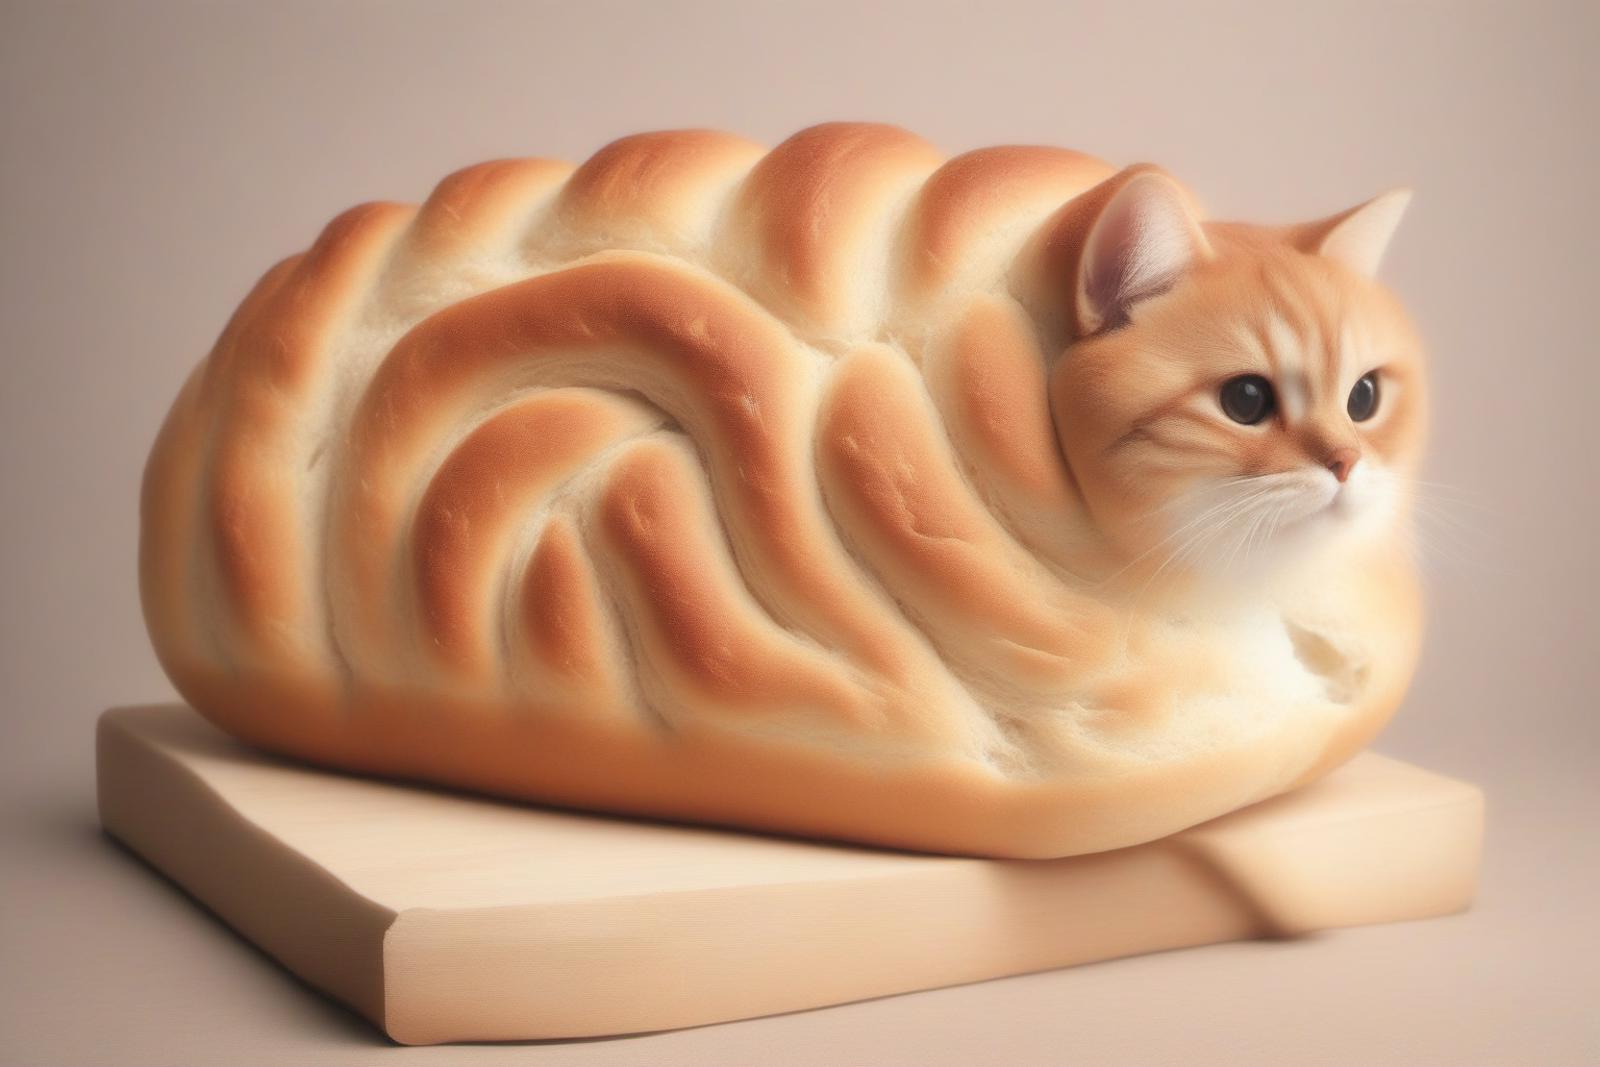 A loaf of bread that looks like a cat.